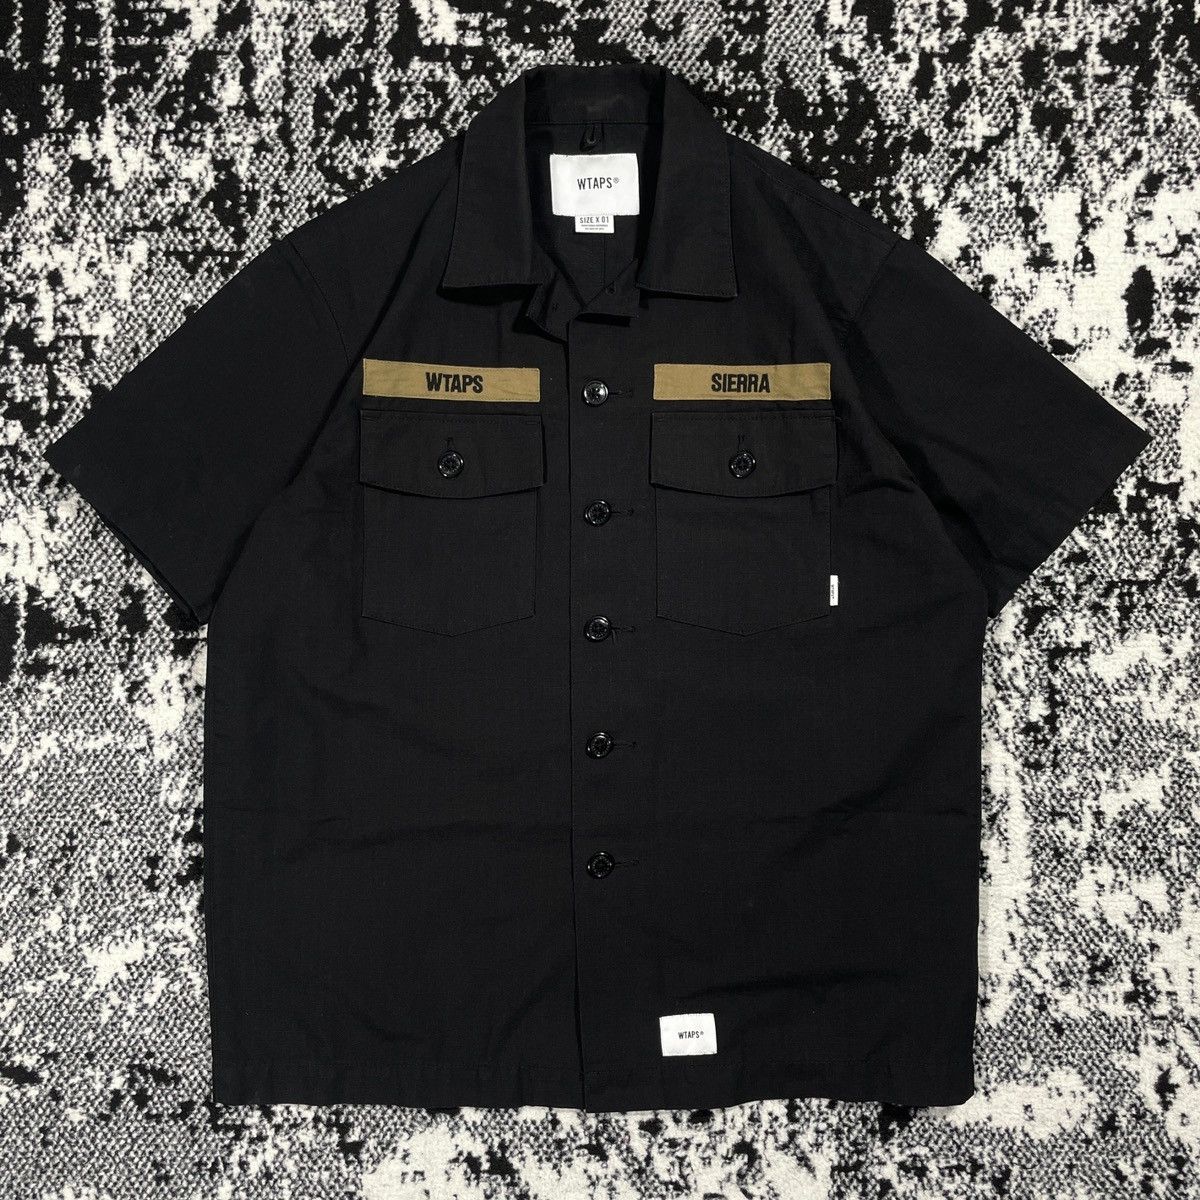 Wtaps WTAPS BUDS SS/SHIRT COTTON RIPSTOP 19SS EX38_COLLECTION | Grailed